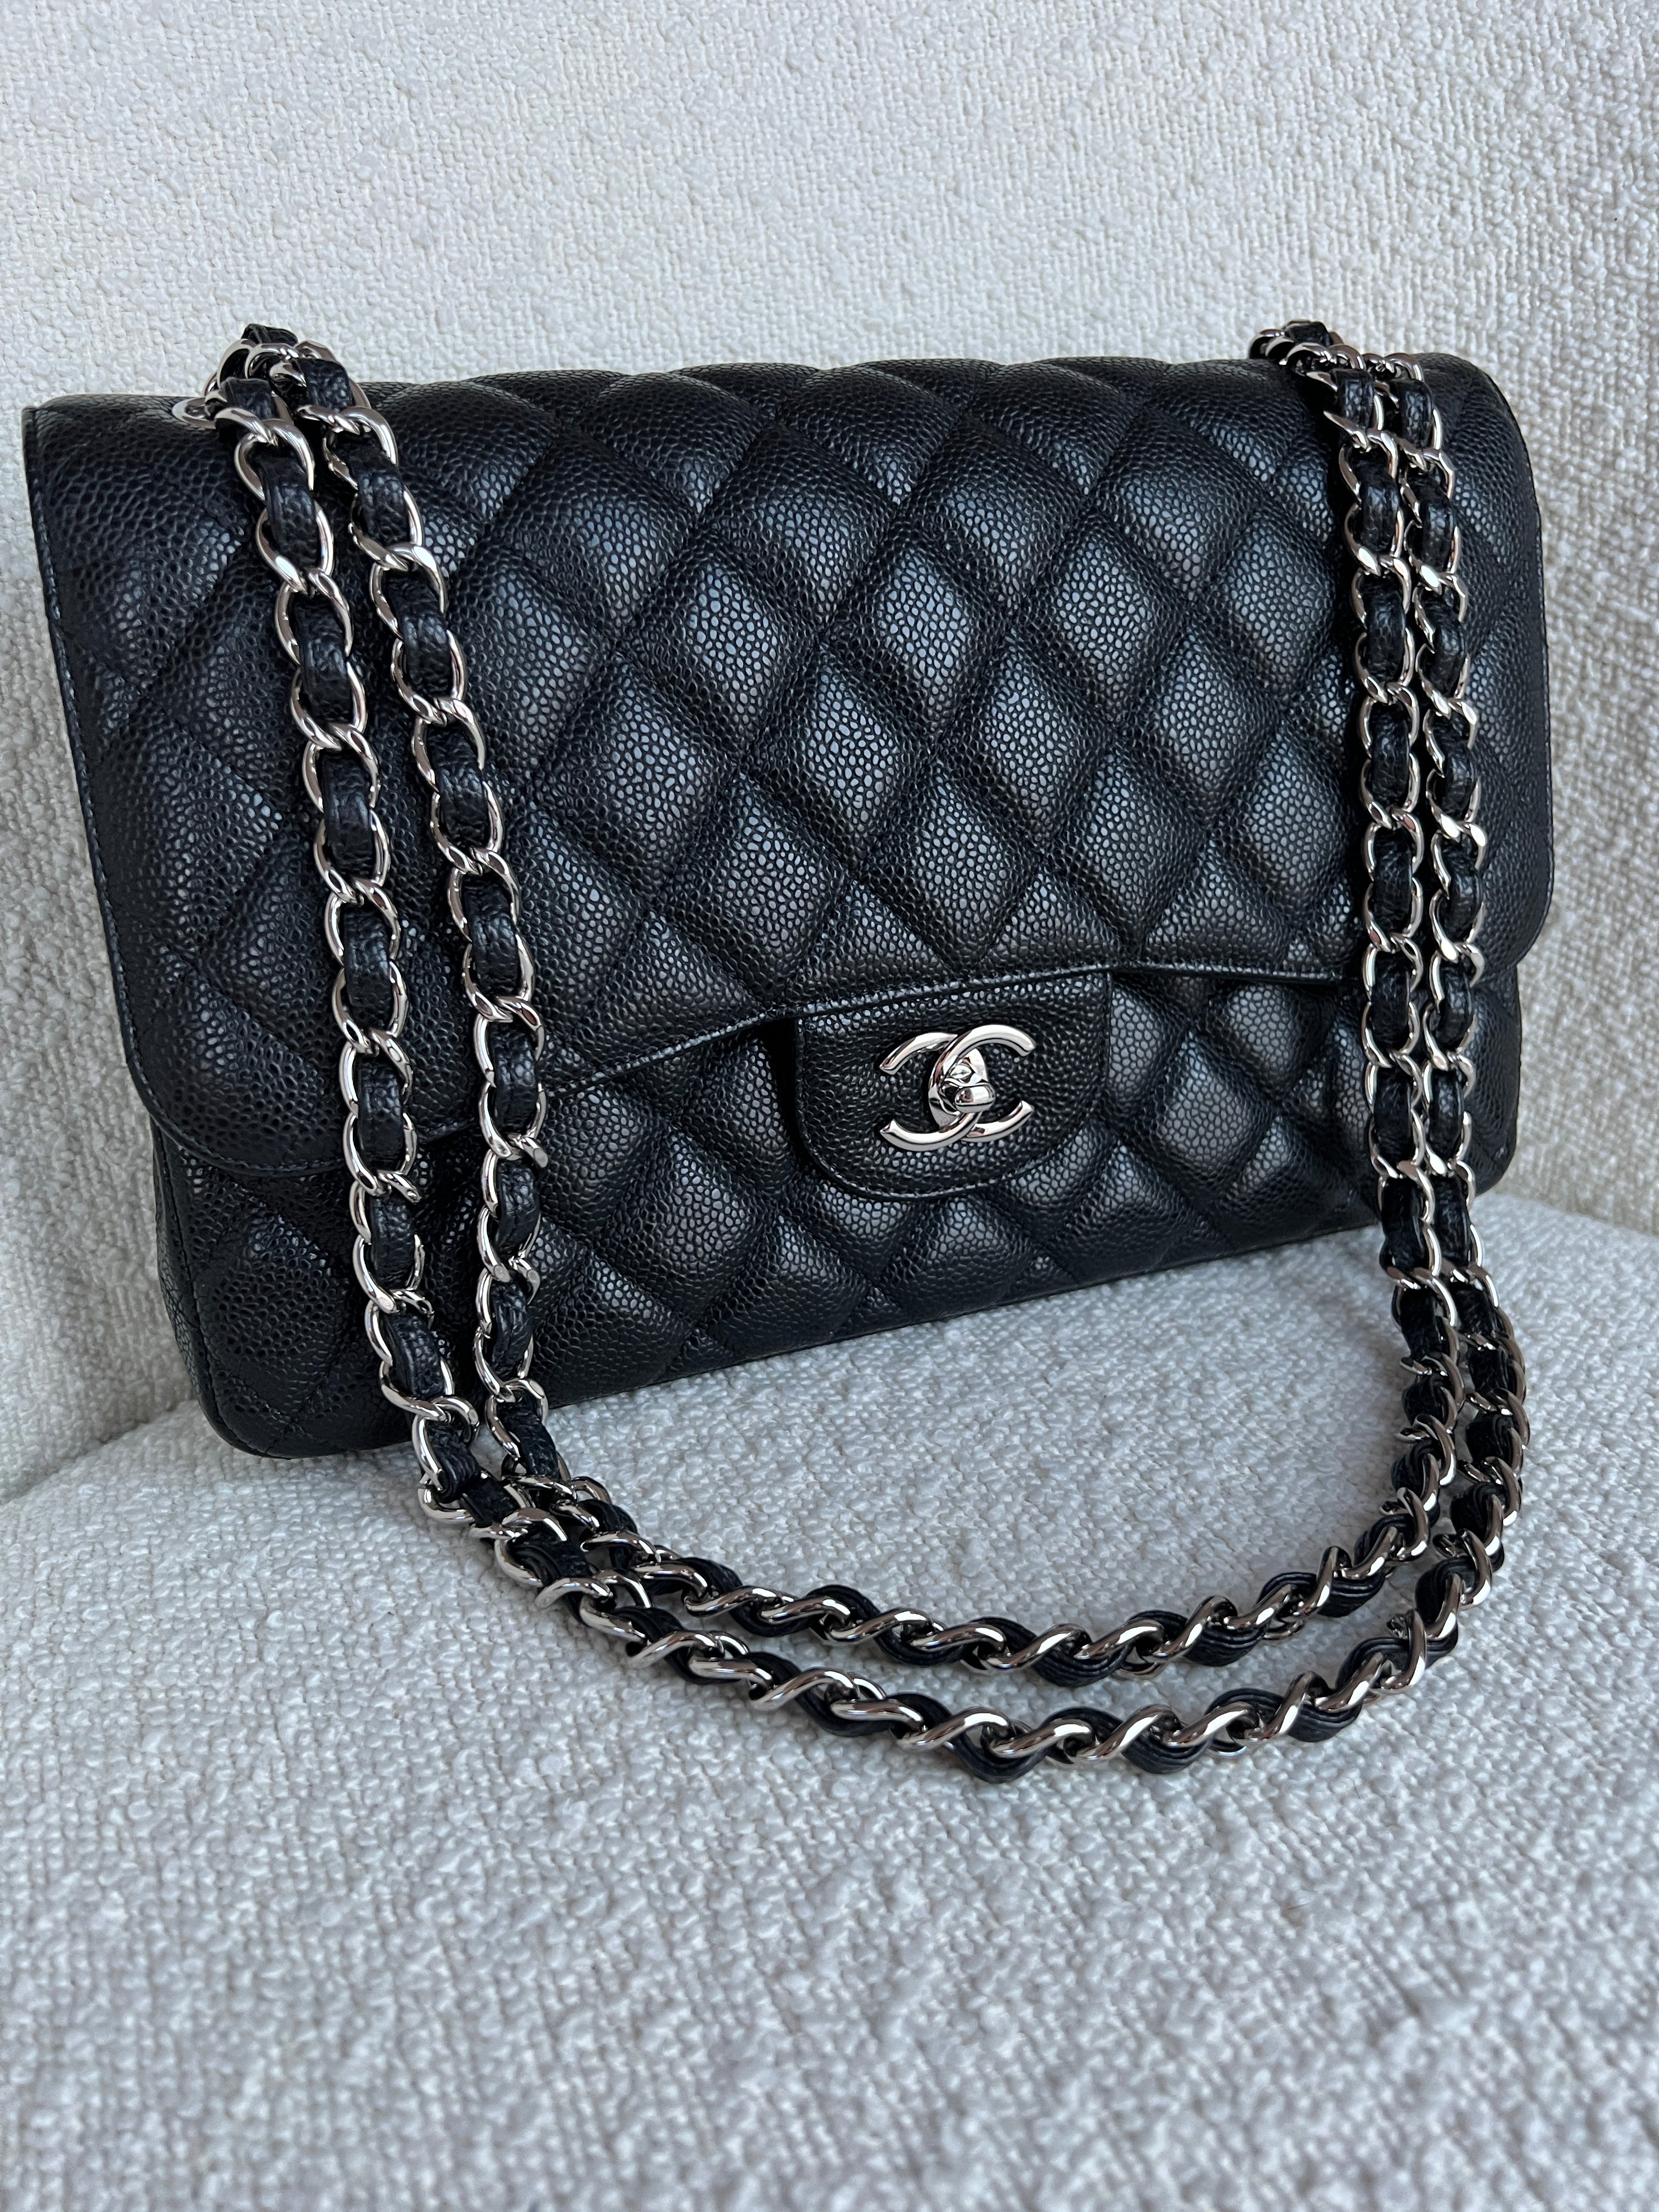 Chanel - Double Sided Jumbo Flap Bag - Vintage - Pre-Loved